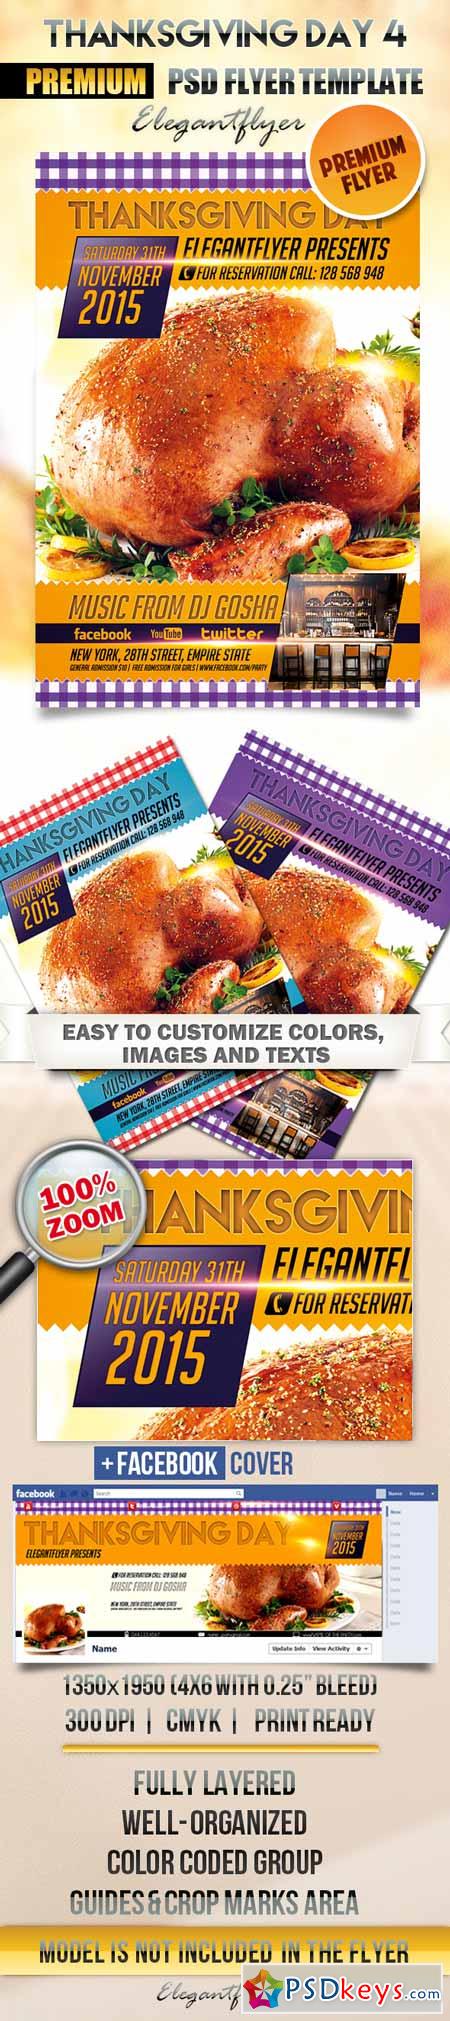 Thanksgiving Day 4  Flyer PSD Template + Facebook Cover